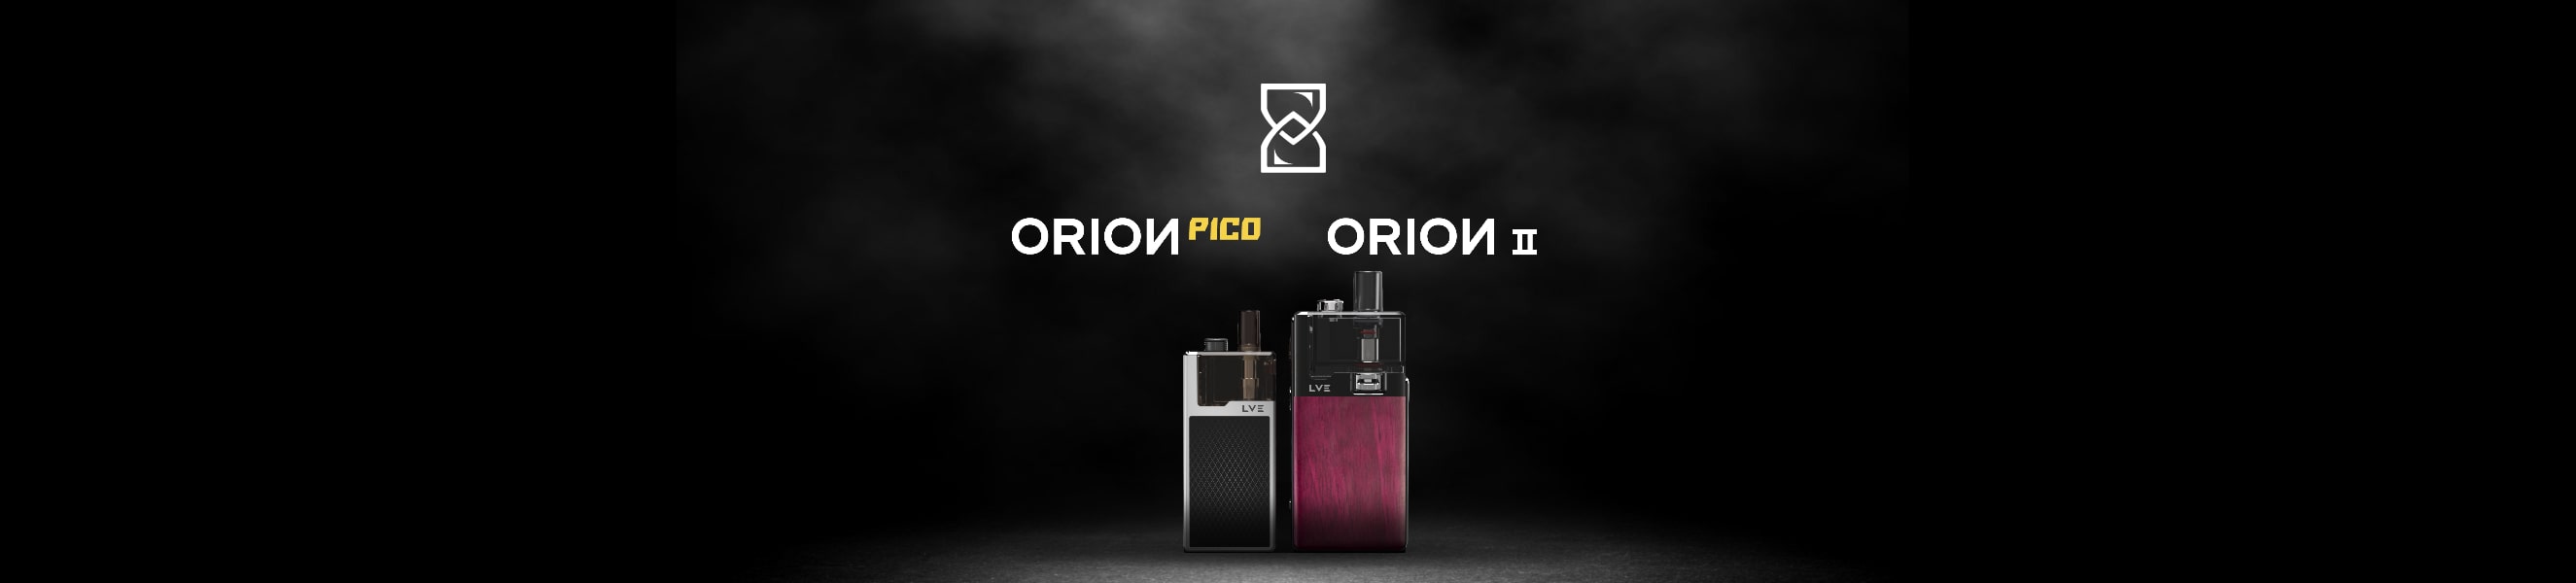 Orion Pico and Orion II